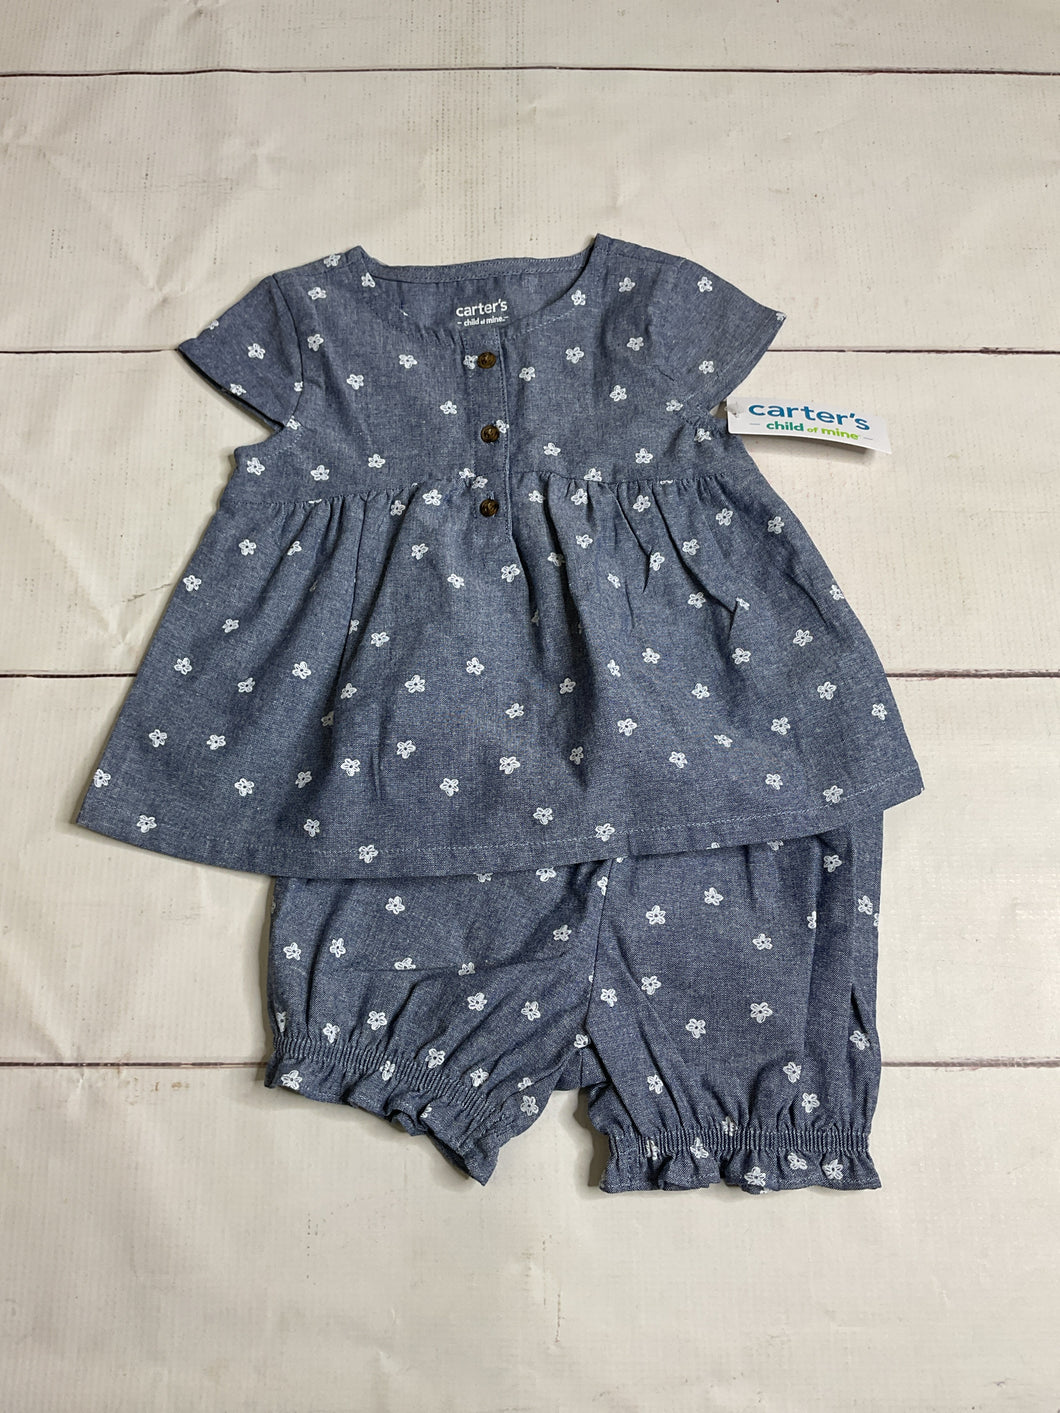 Carter's Size 18M 2pc Outfit